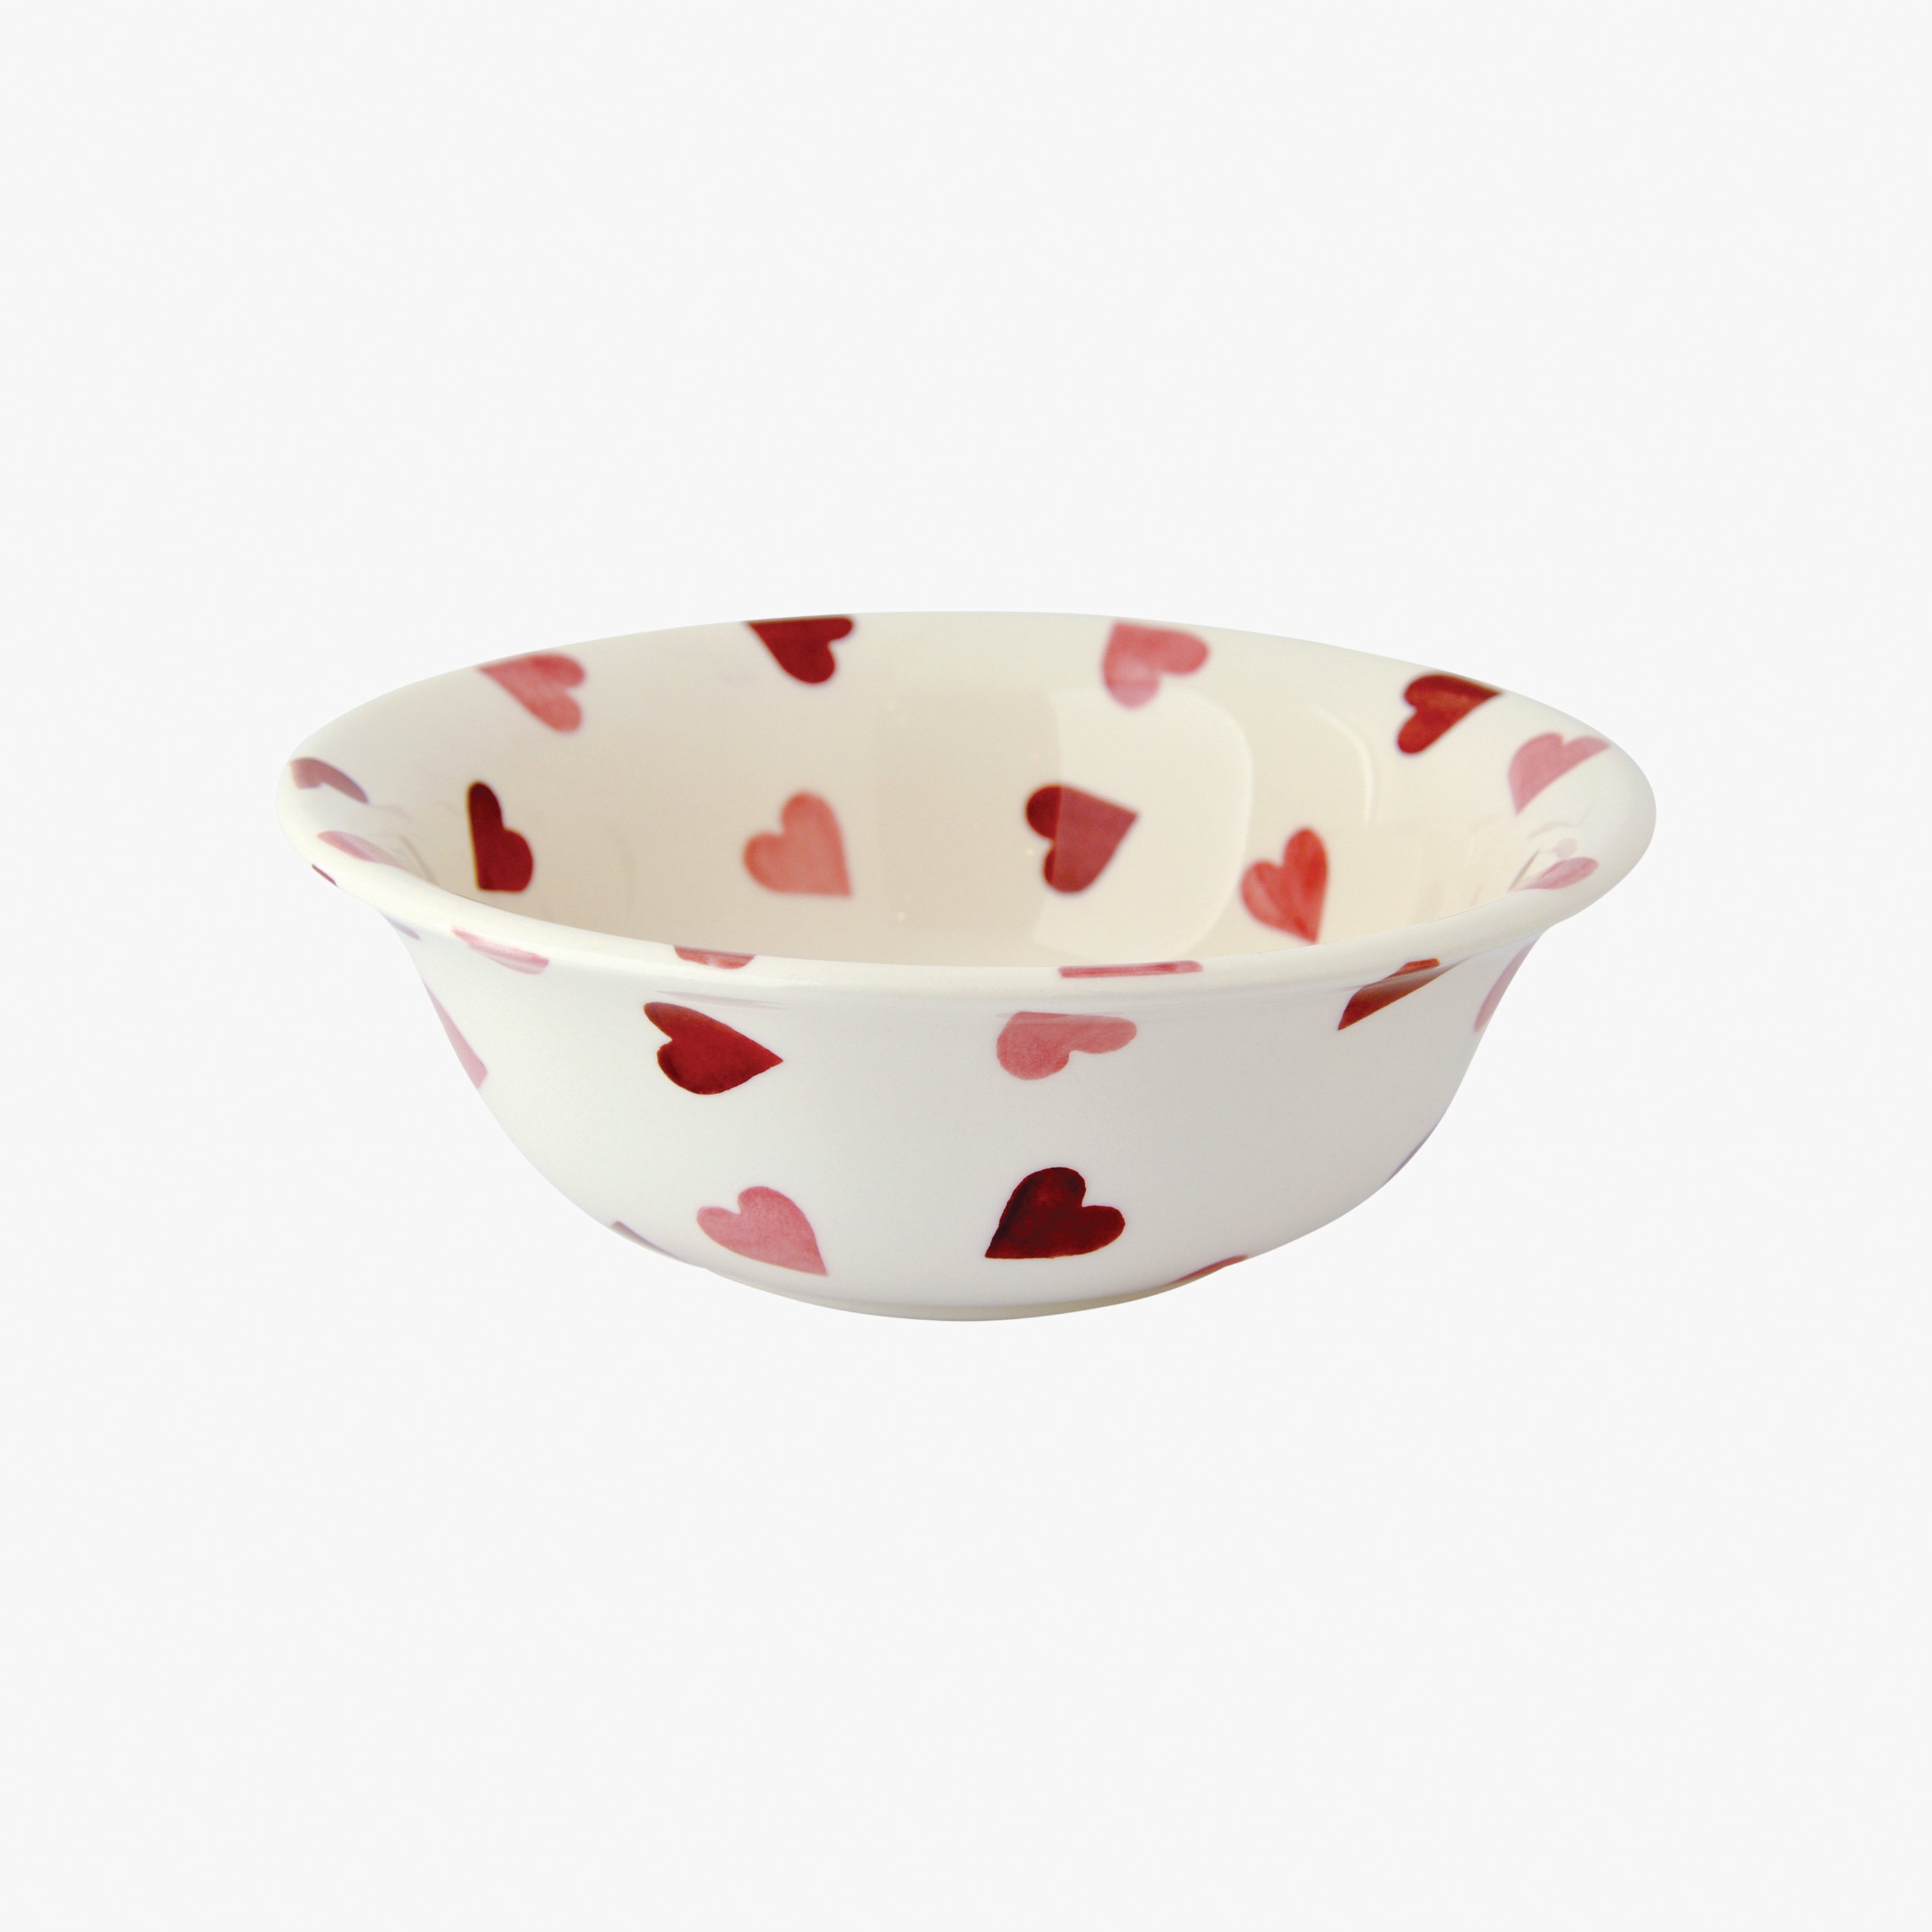 Pink Hearts Cereal Bowl - Unique Handmade & Handpainted English Earthenware Decorative Plates  | Emm